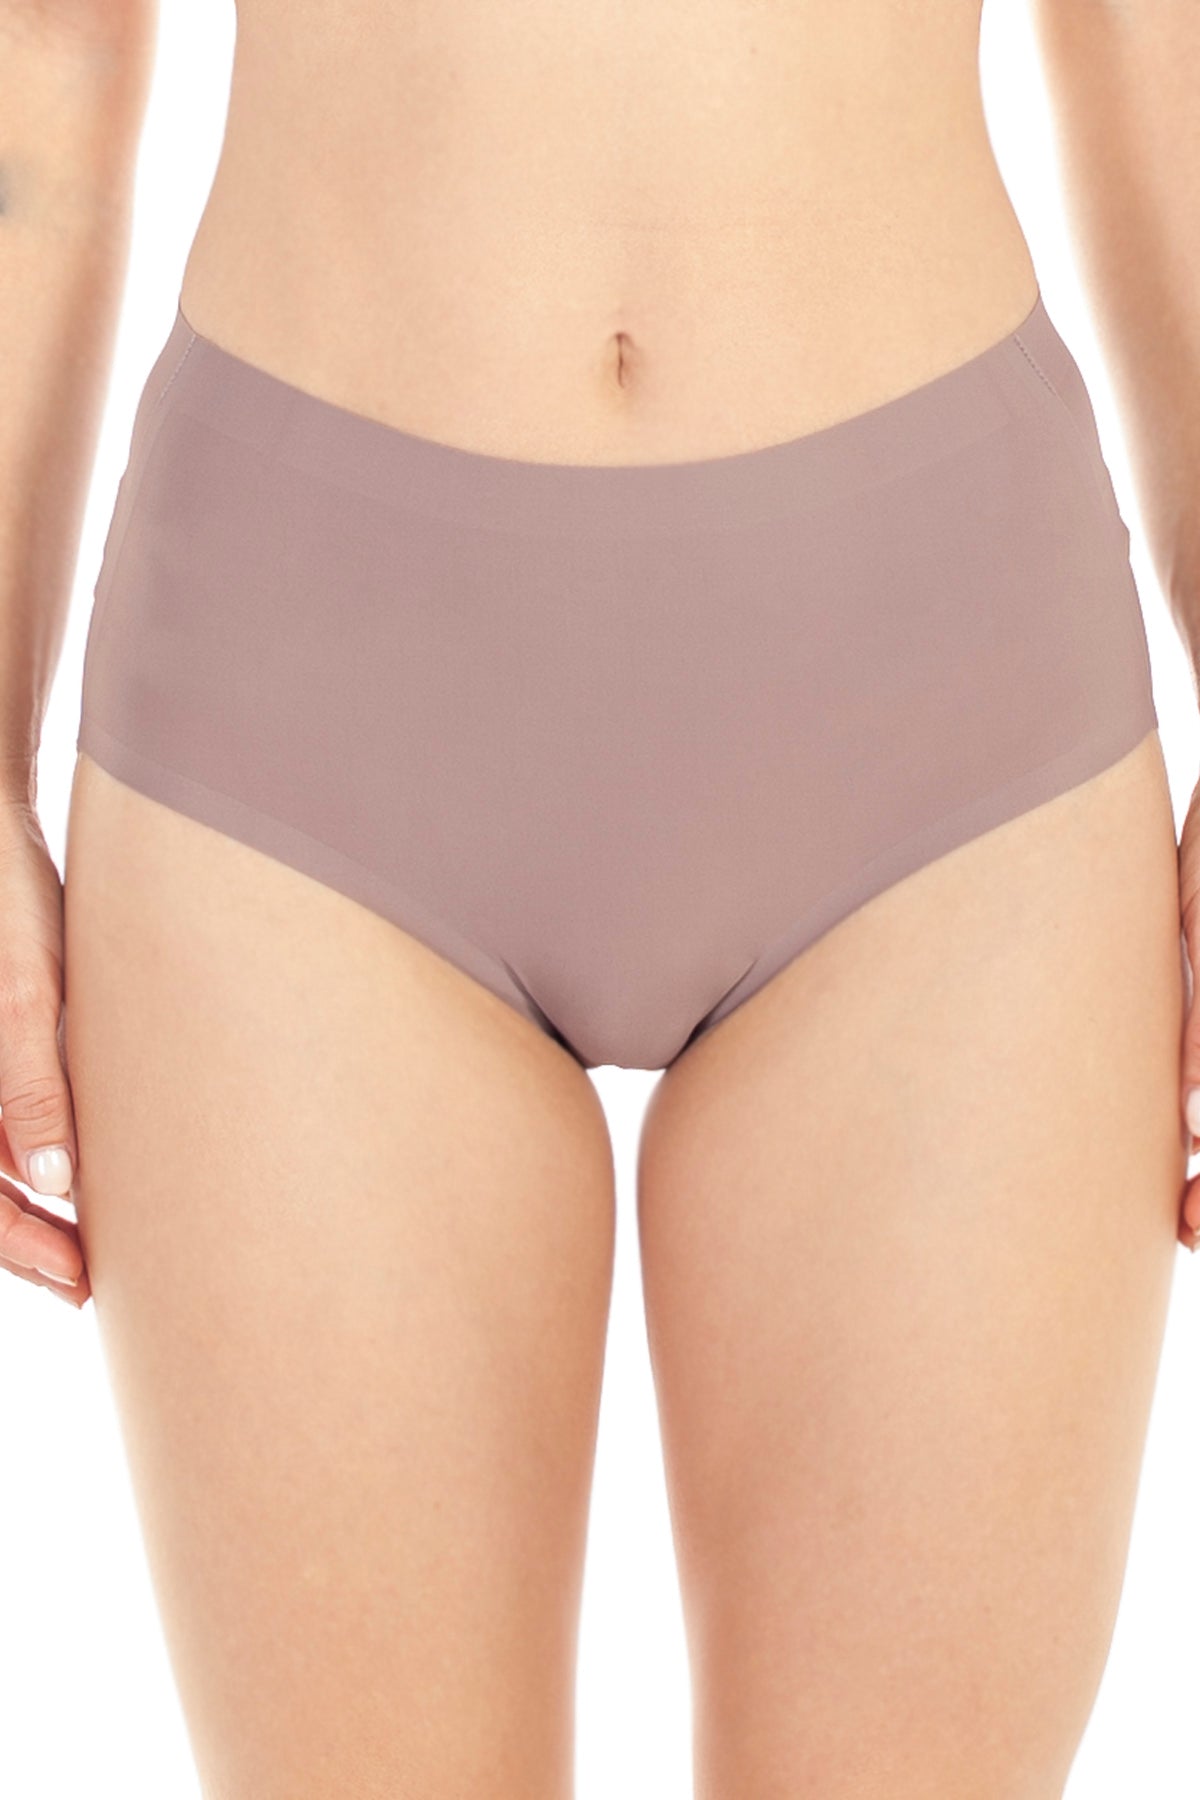 Women's No Line Strapless Panties Invisible Zambia